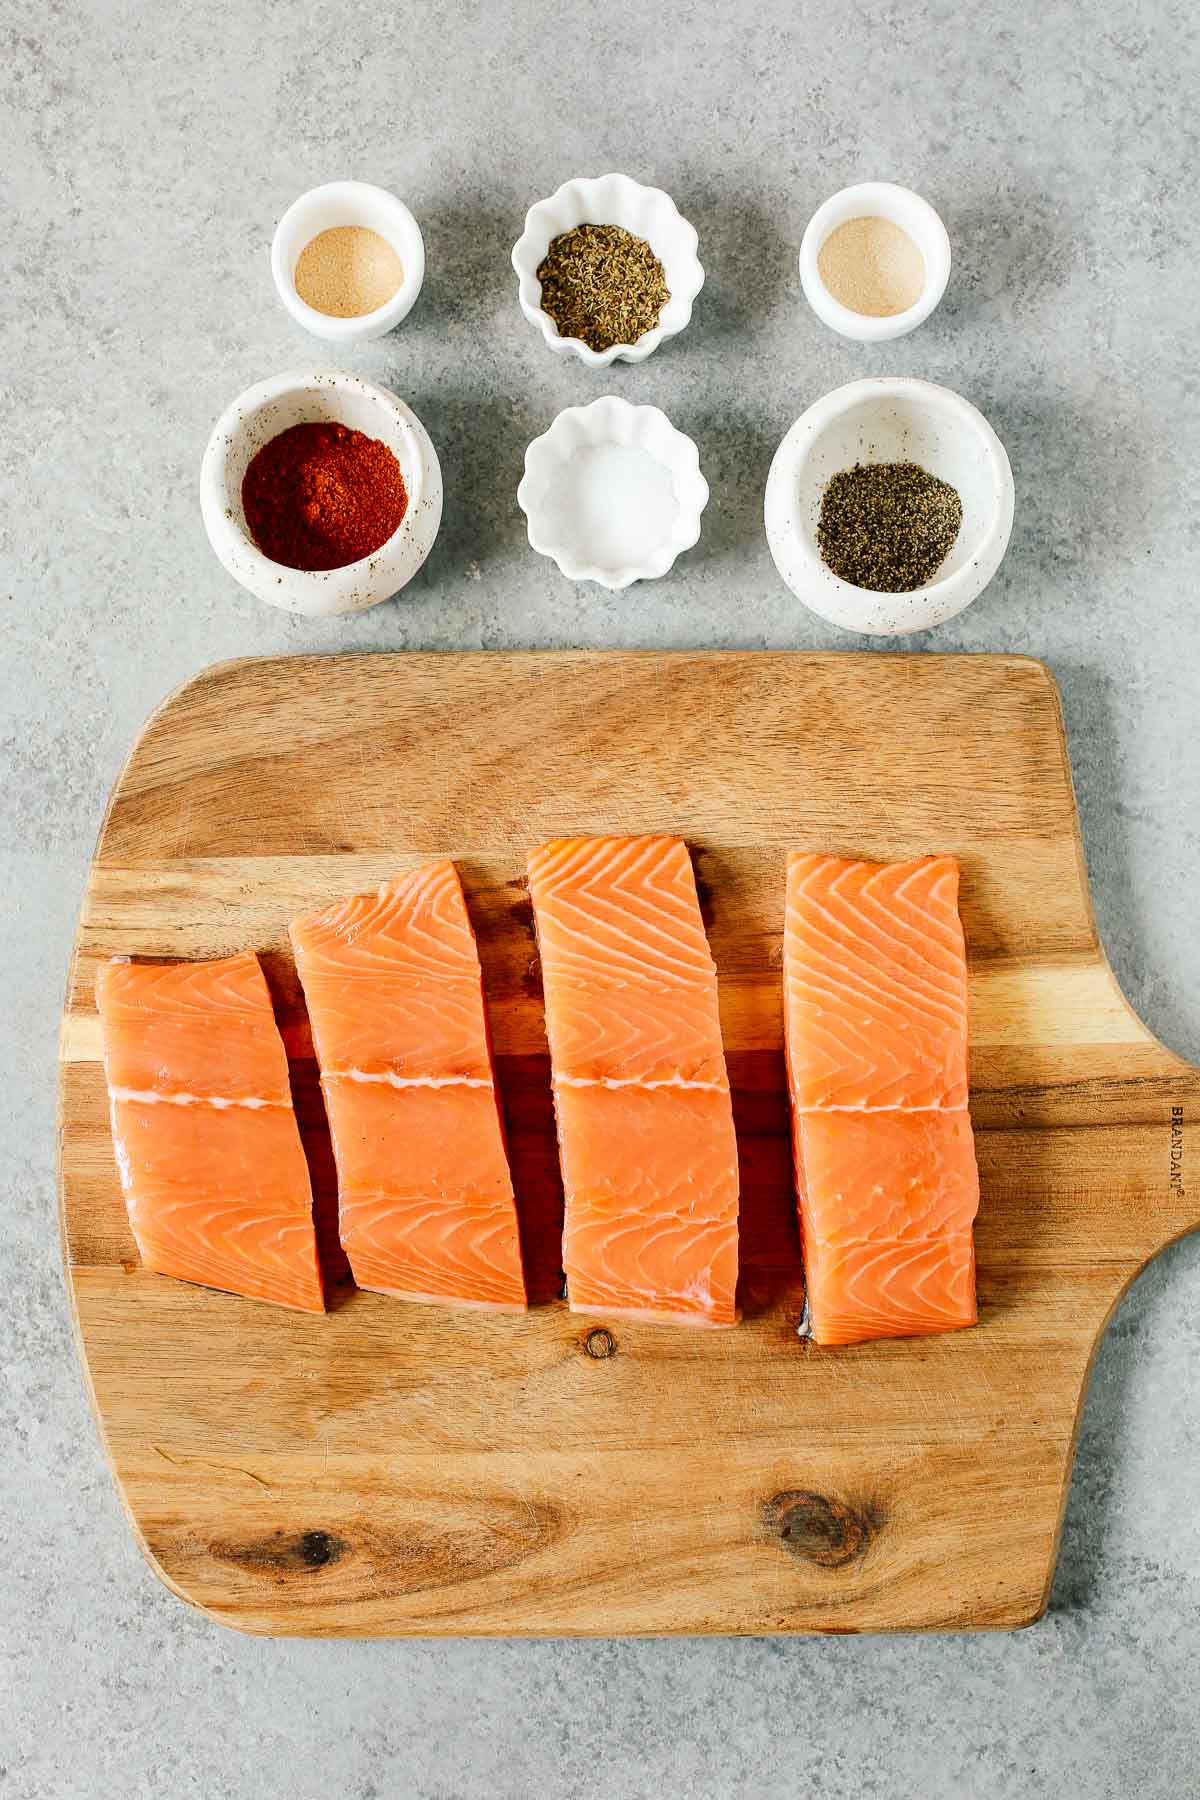 overhead image: 4 raw fish fillets and 6 small prep bowls with spices to make a blackened salmon recipe